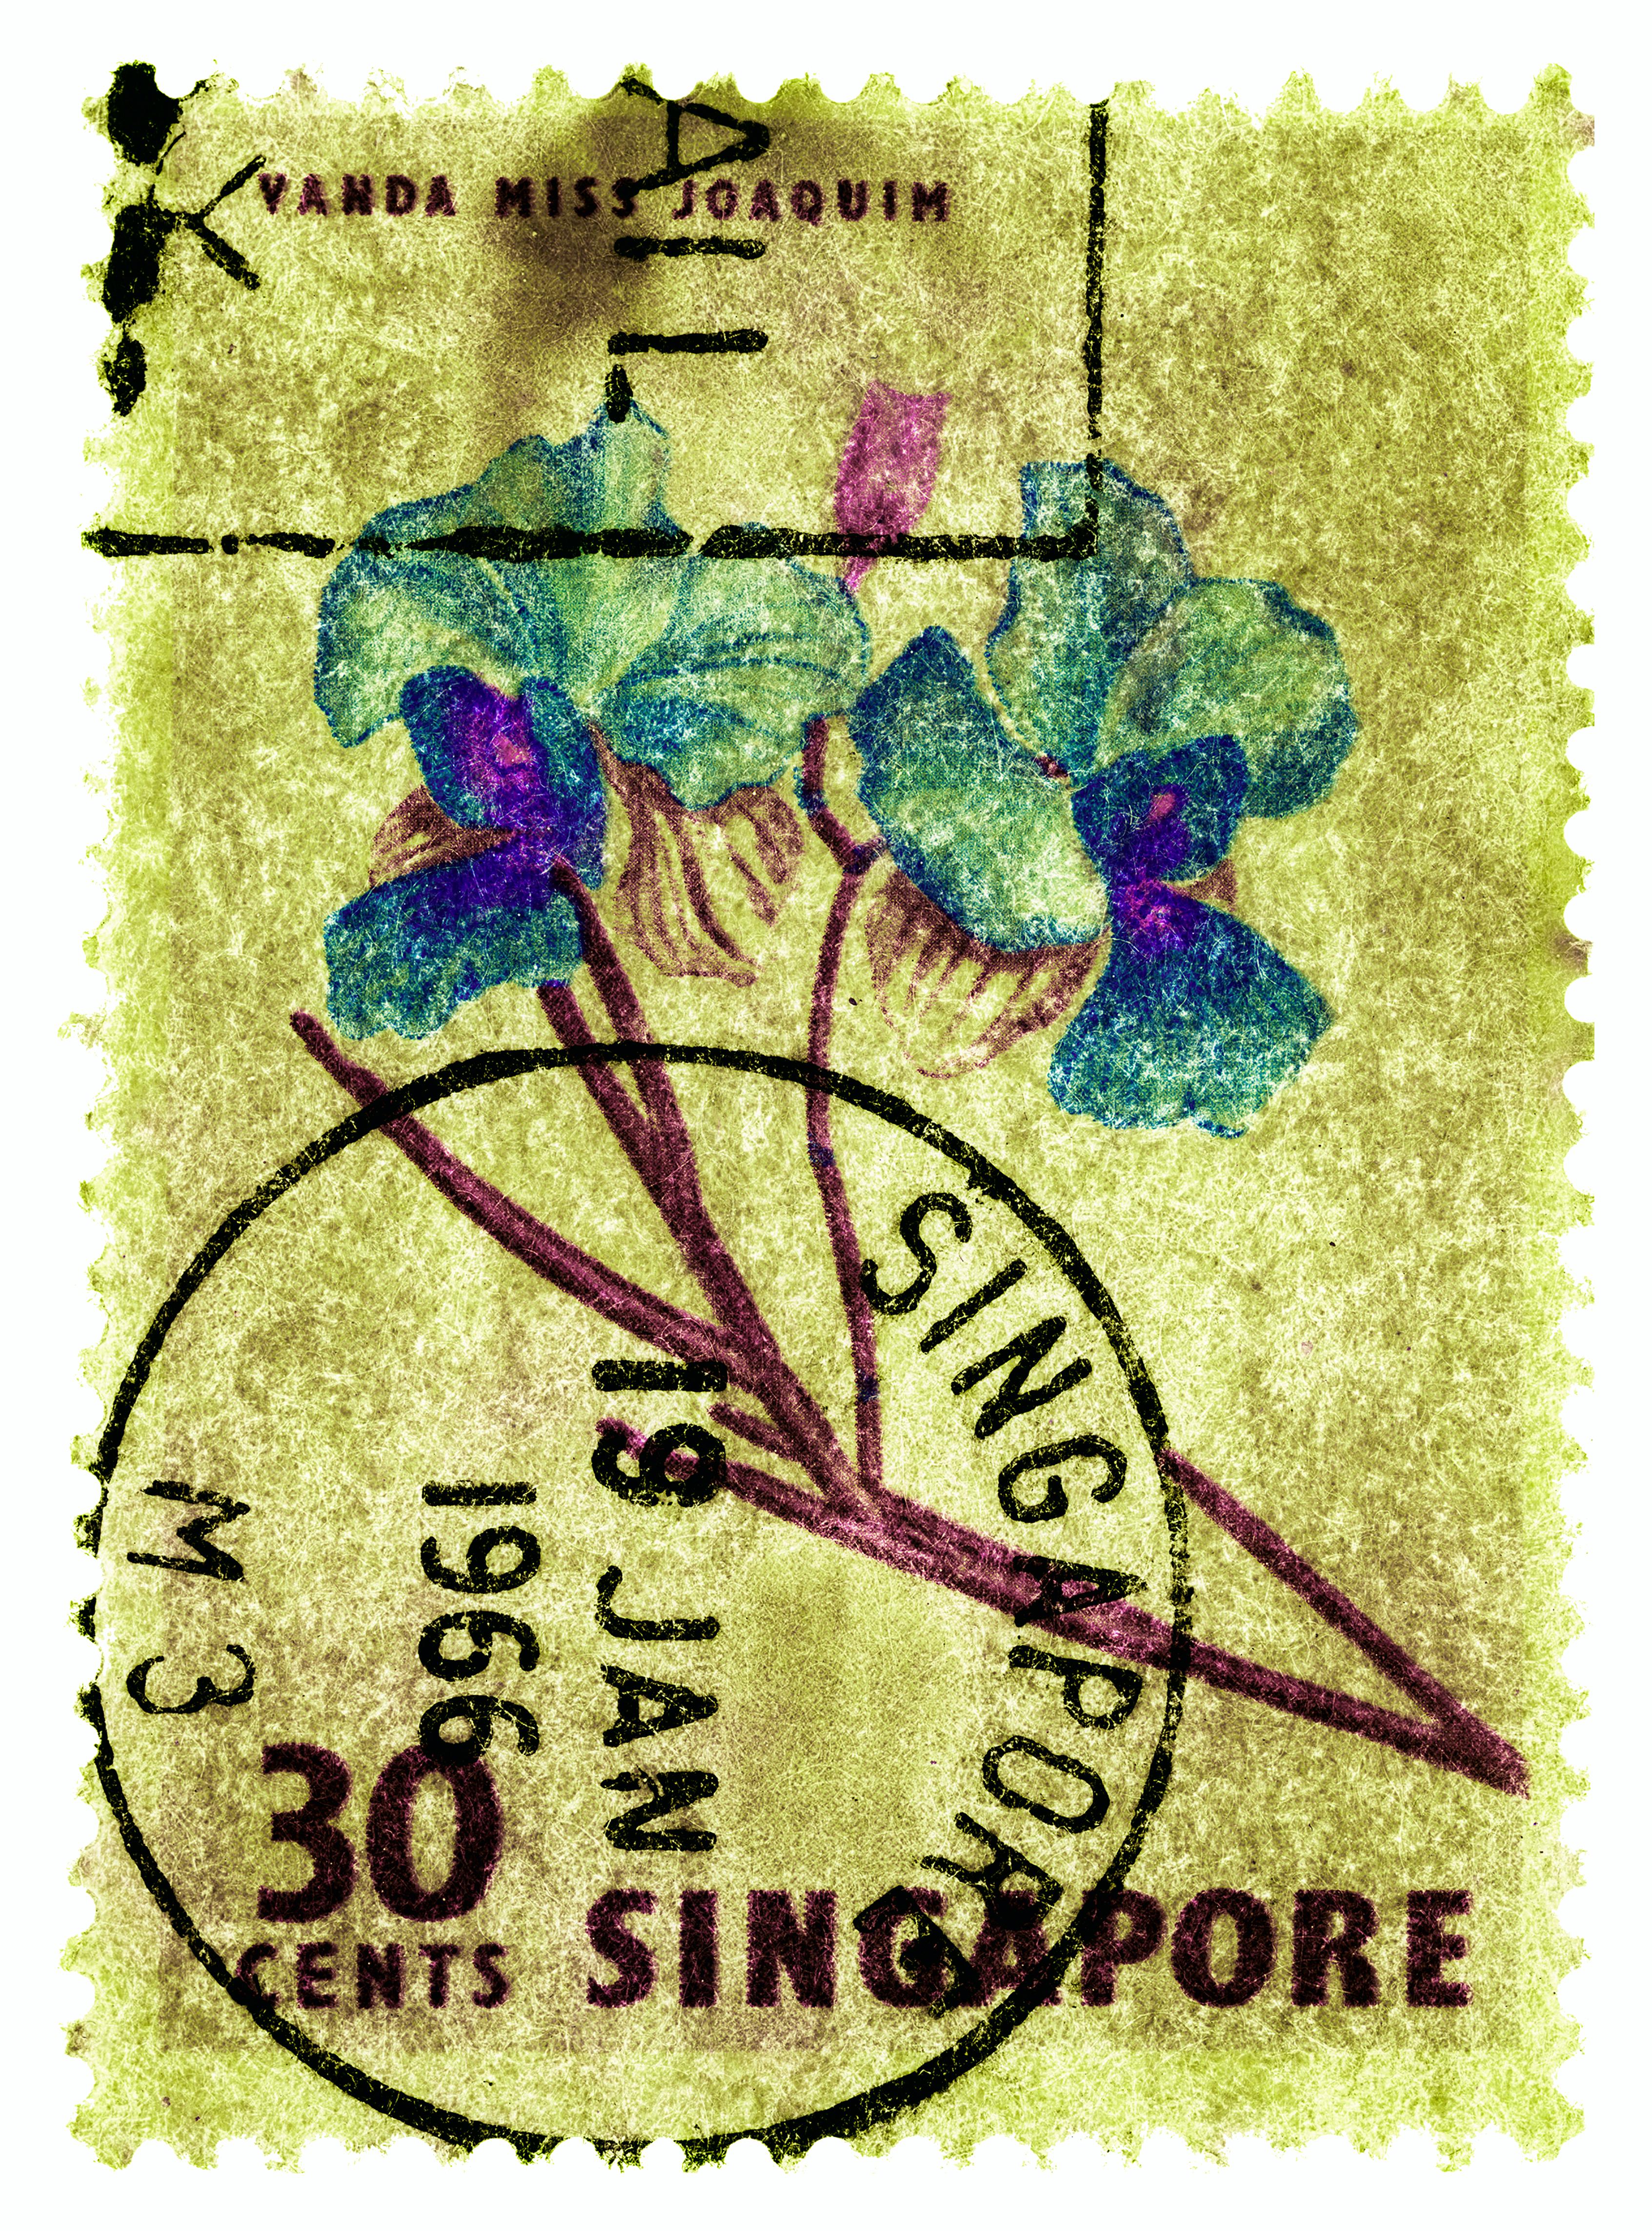 Singapore Stamp Collection, 30c Singapore Four - Floral color photo - Conceptual Print by Heidler & Heeps